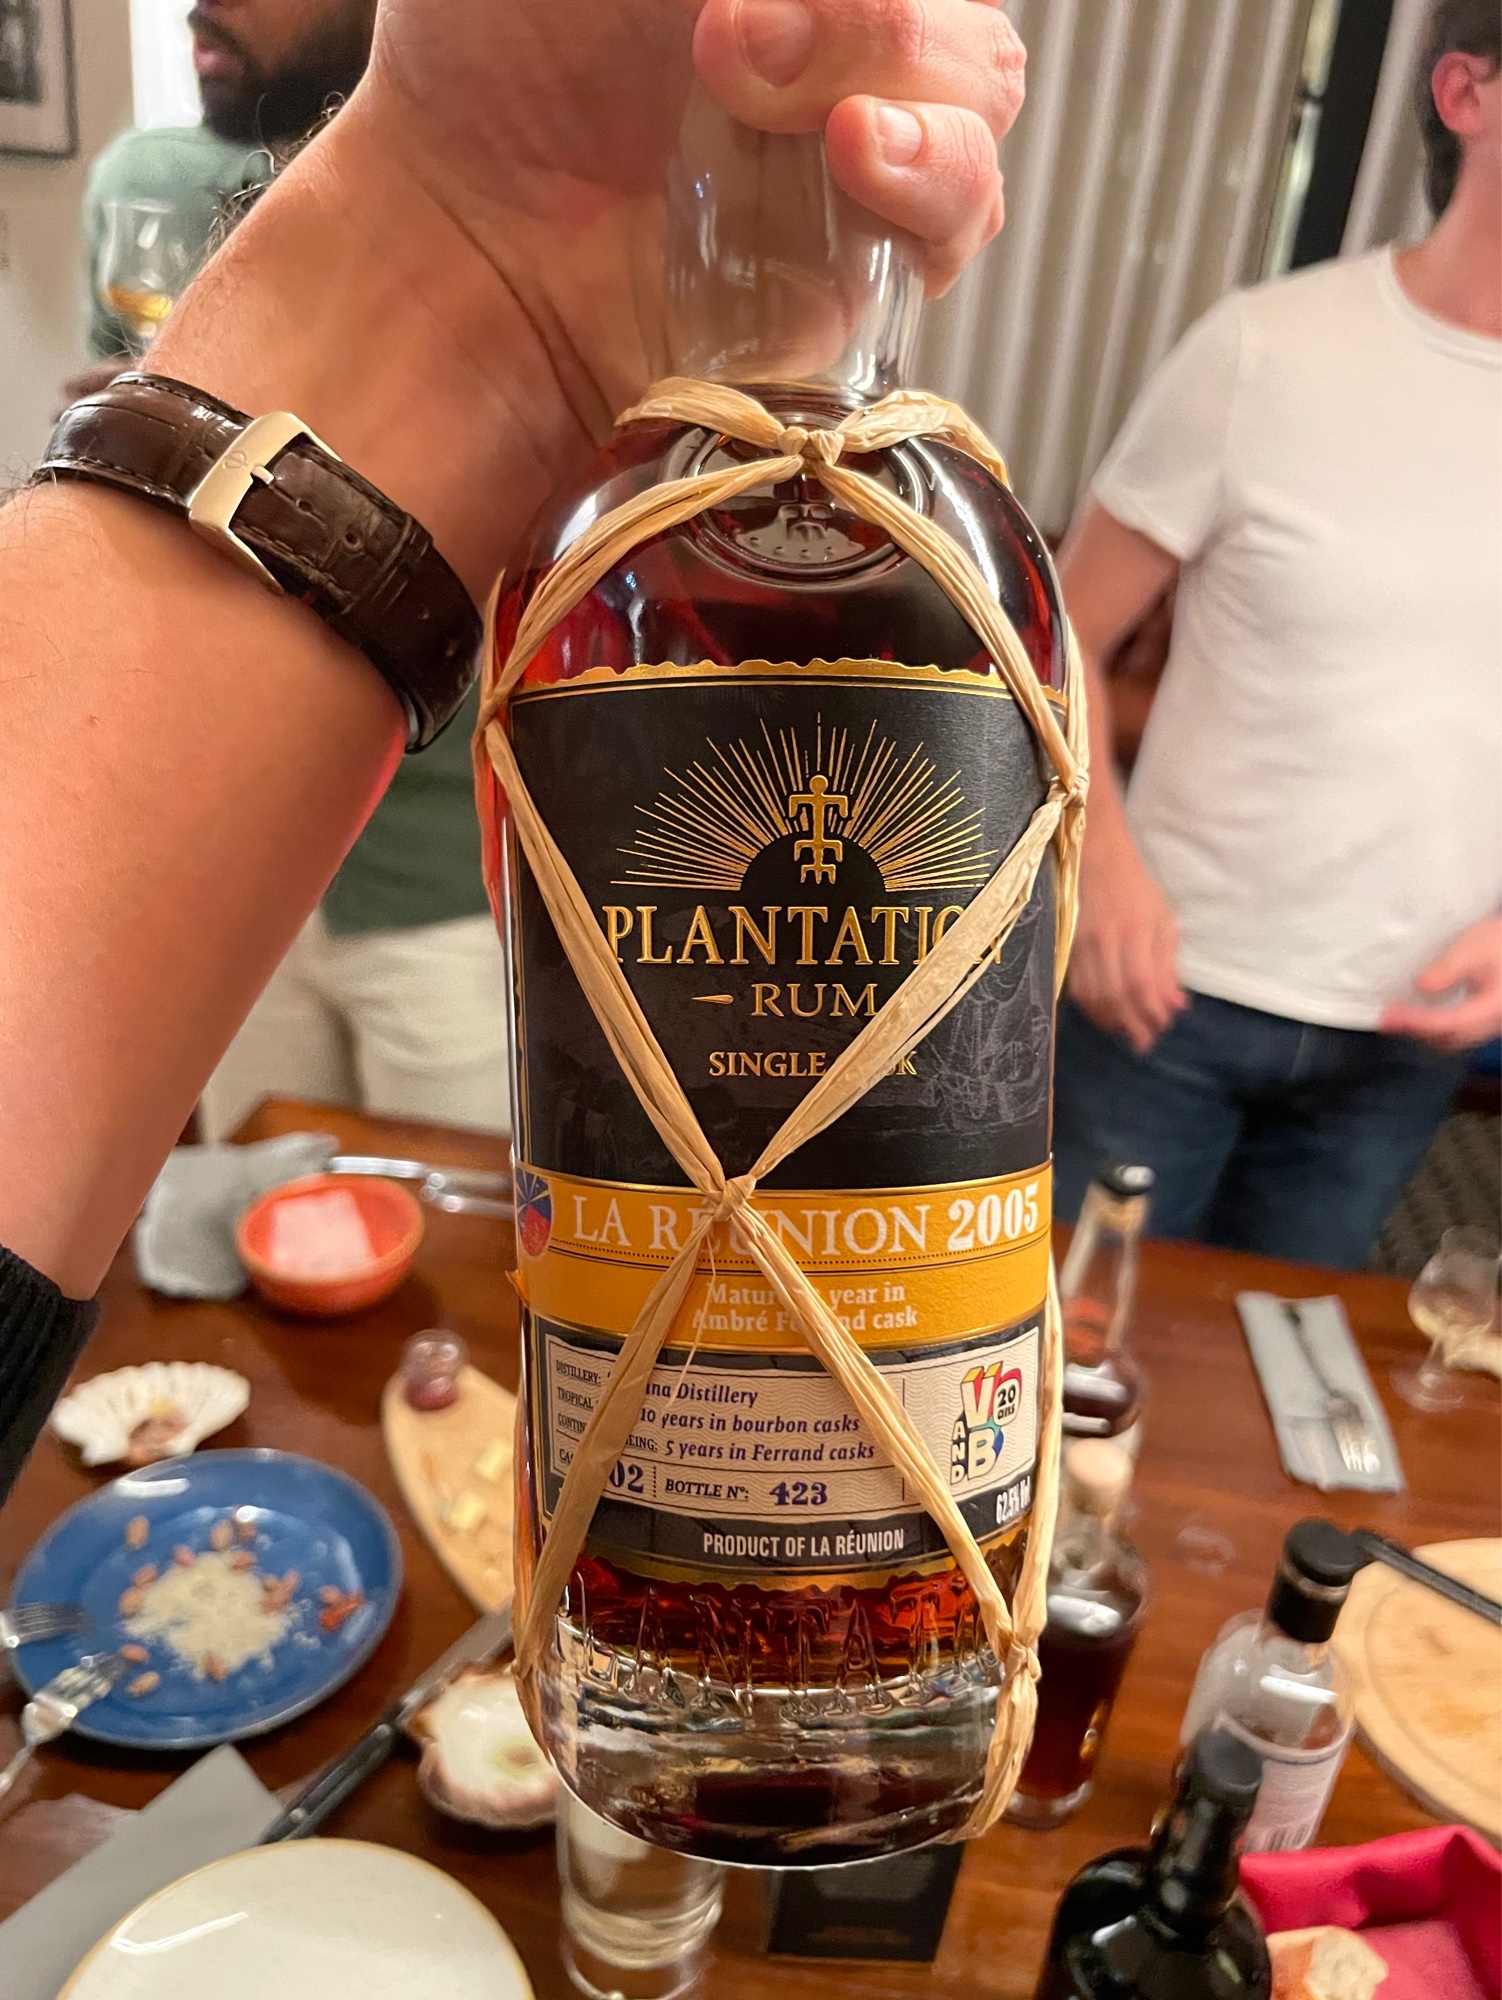 Photo of the bottle taken from user Maxime Checler 🇫🇷